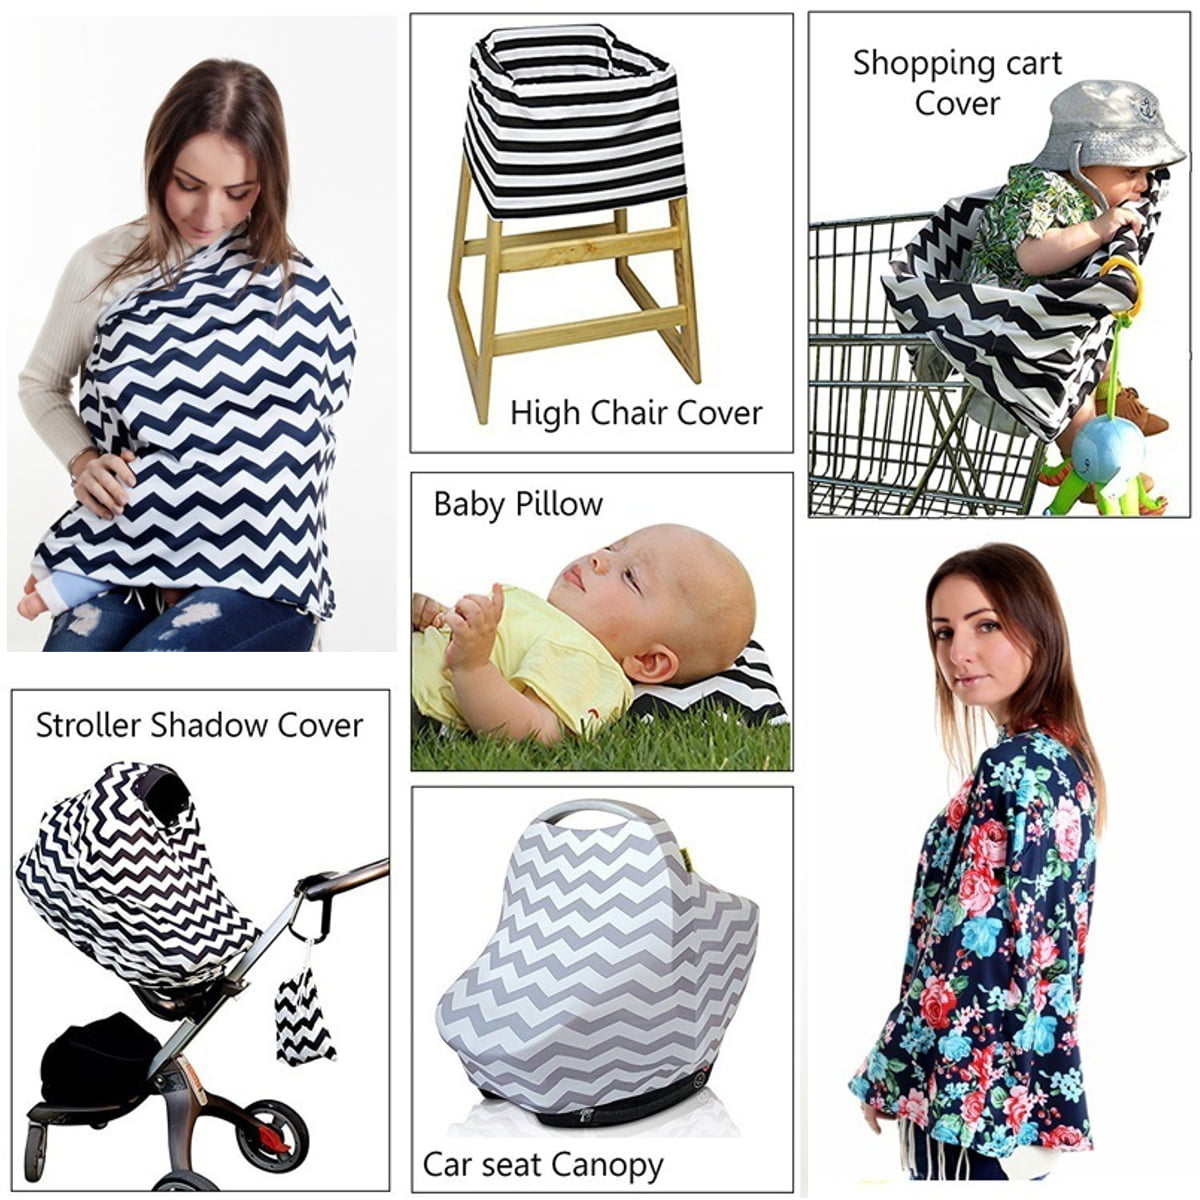 Baby Car Seat Cover & Drawstring Carry Bag Shower Gift Breathable Stretchy Infant Car seat Canopy Covers Luxurious Black YIHANG 360° FULL COVERAGE Nursing Cover for Breastfeeding 